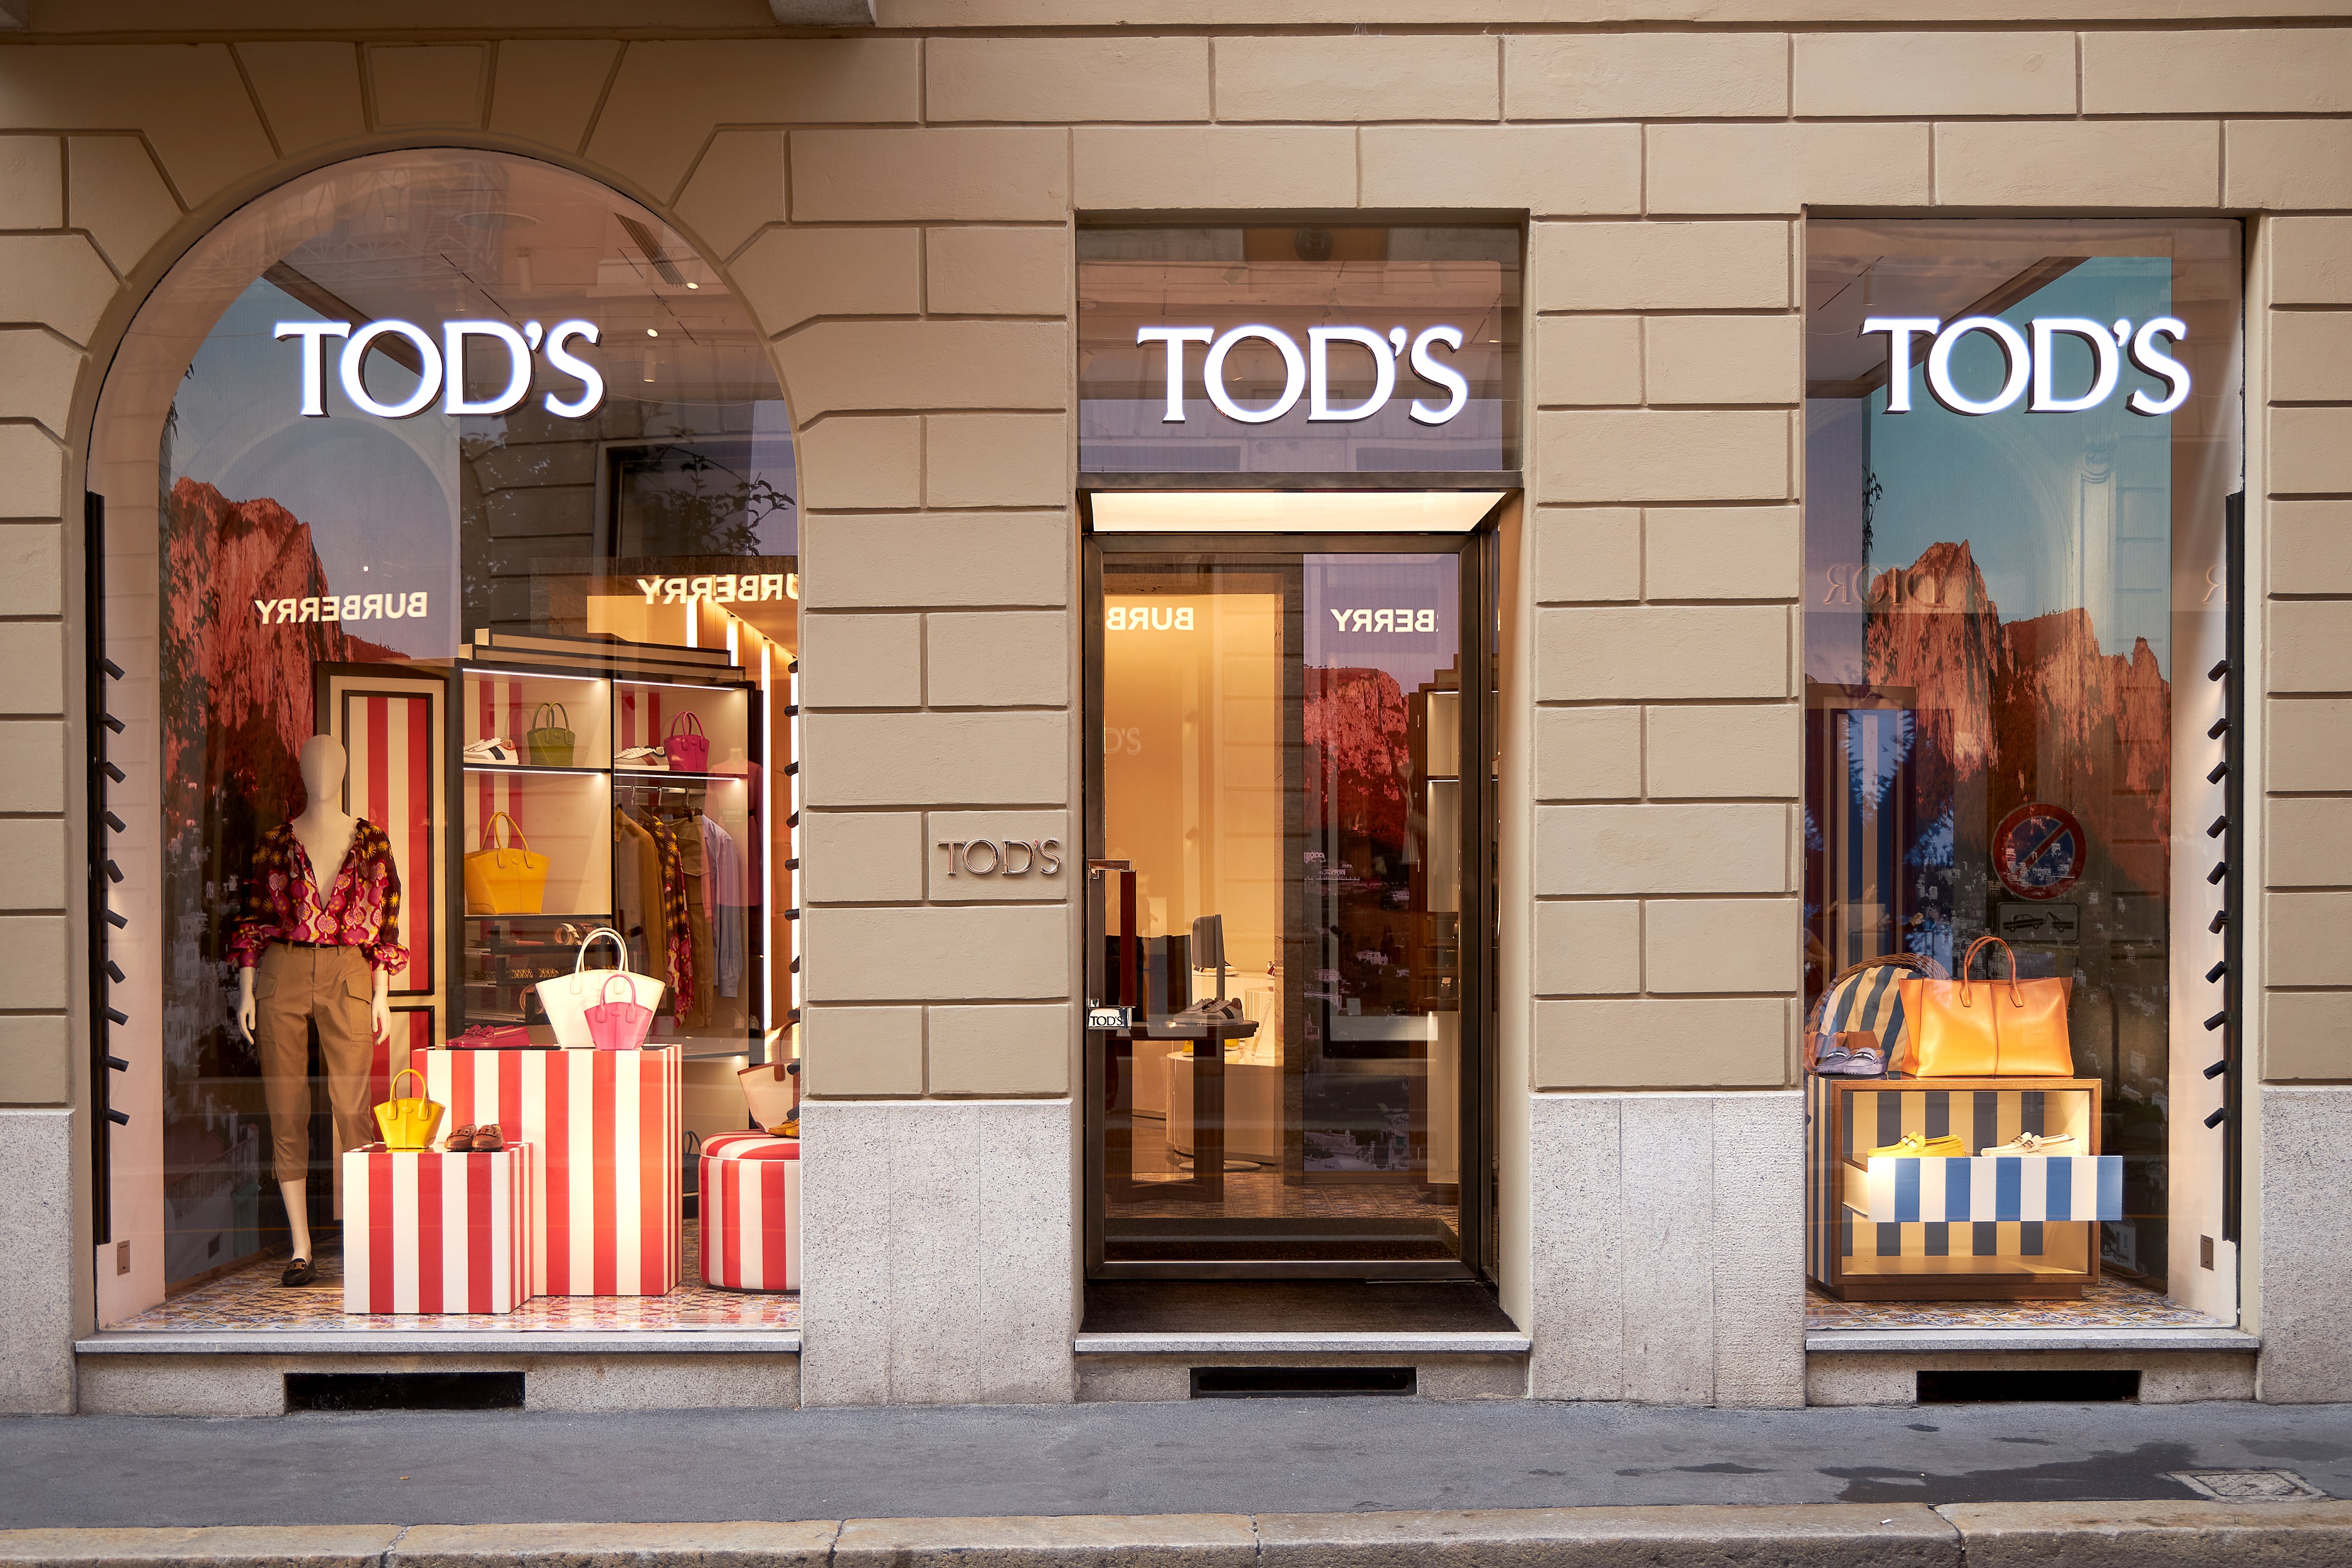 Della Valle family fails to reach 90% Tod's target as offer closes